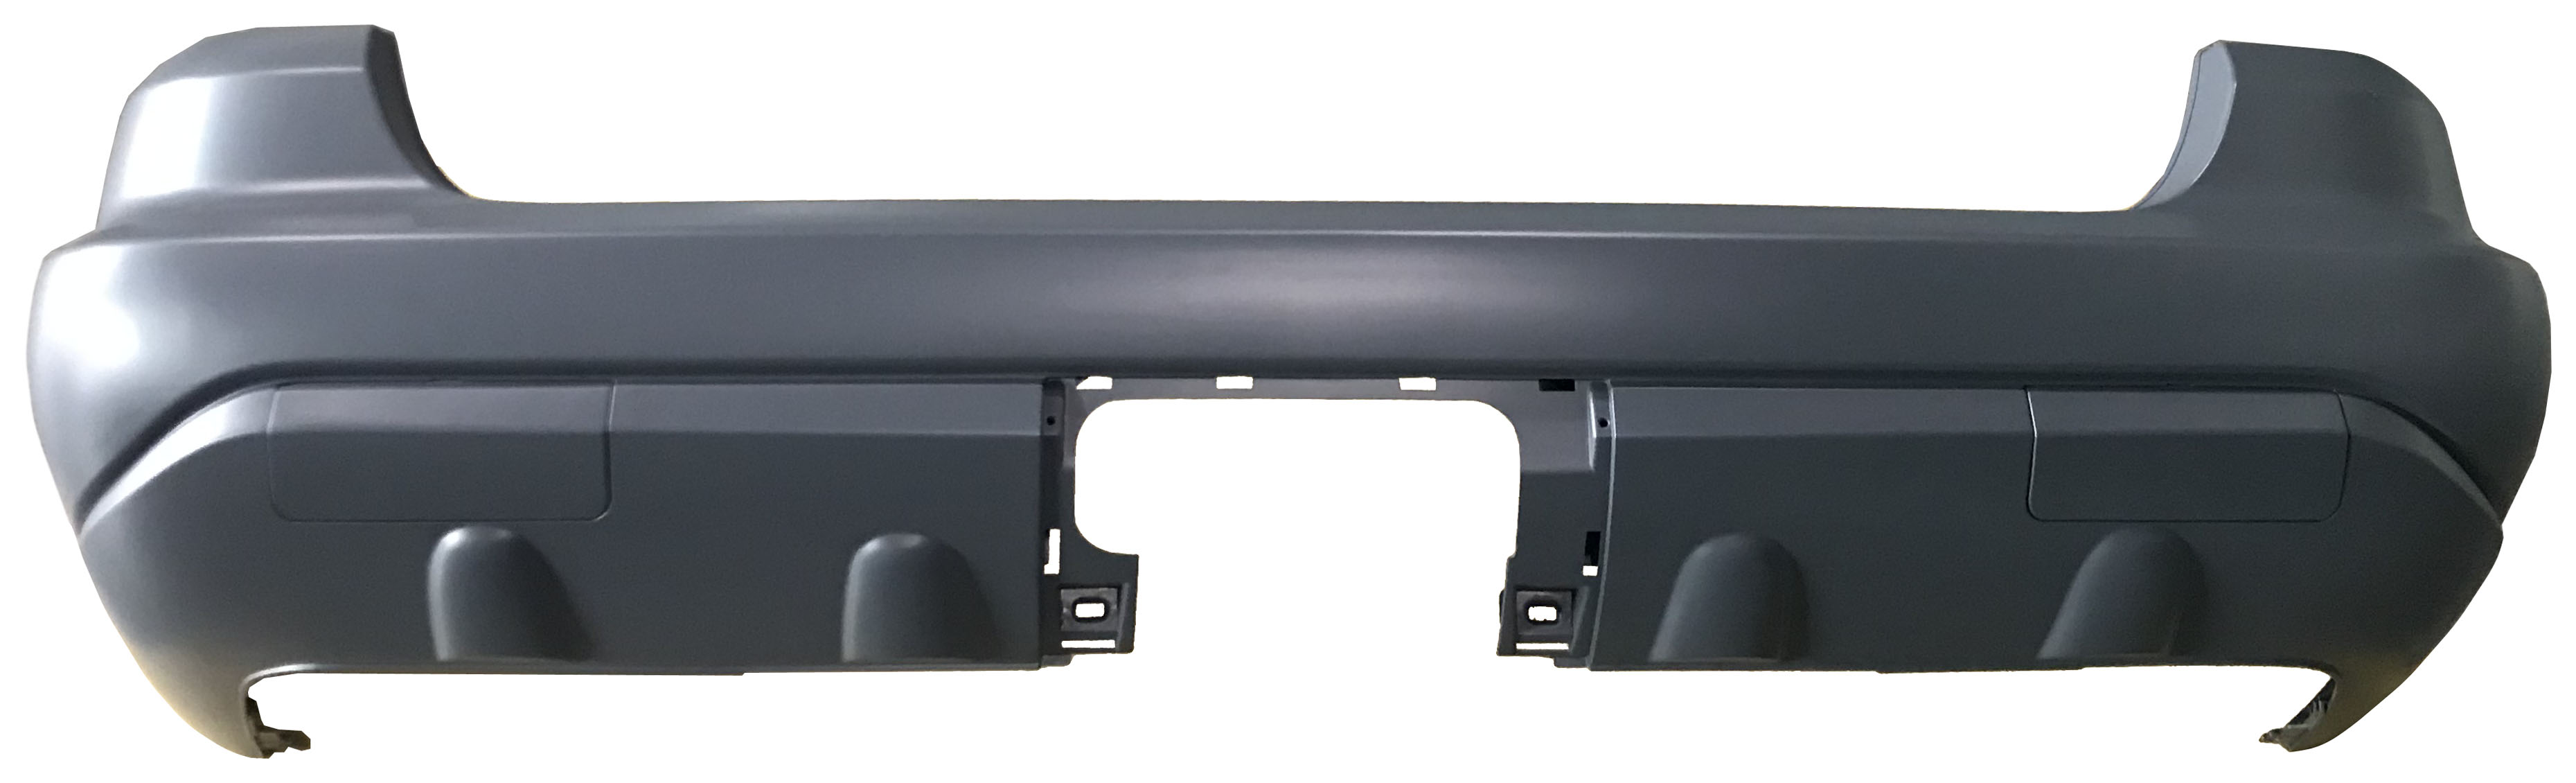 Aftermarket BUMPER COVERS for MERCEDES-BENZ - ML500, ML500,02-05,Rear bumper cover